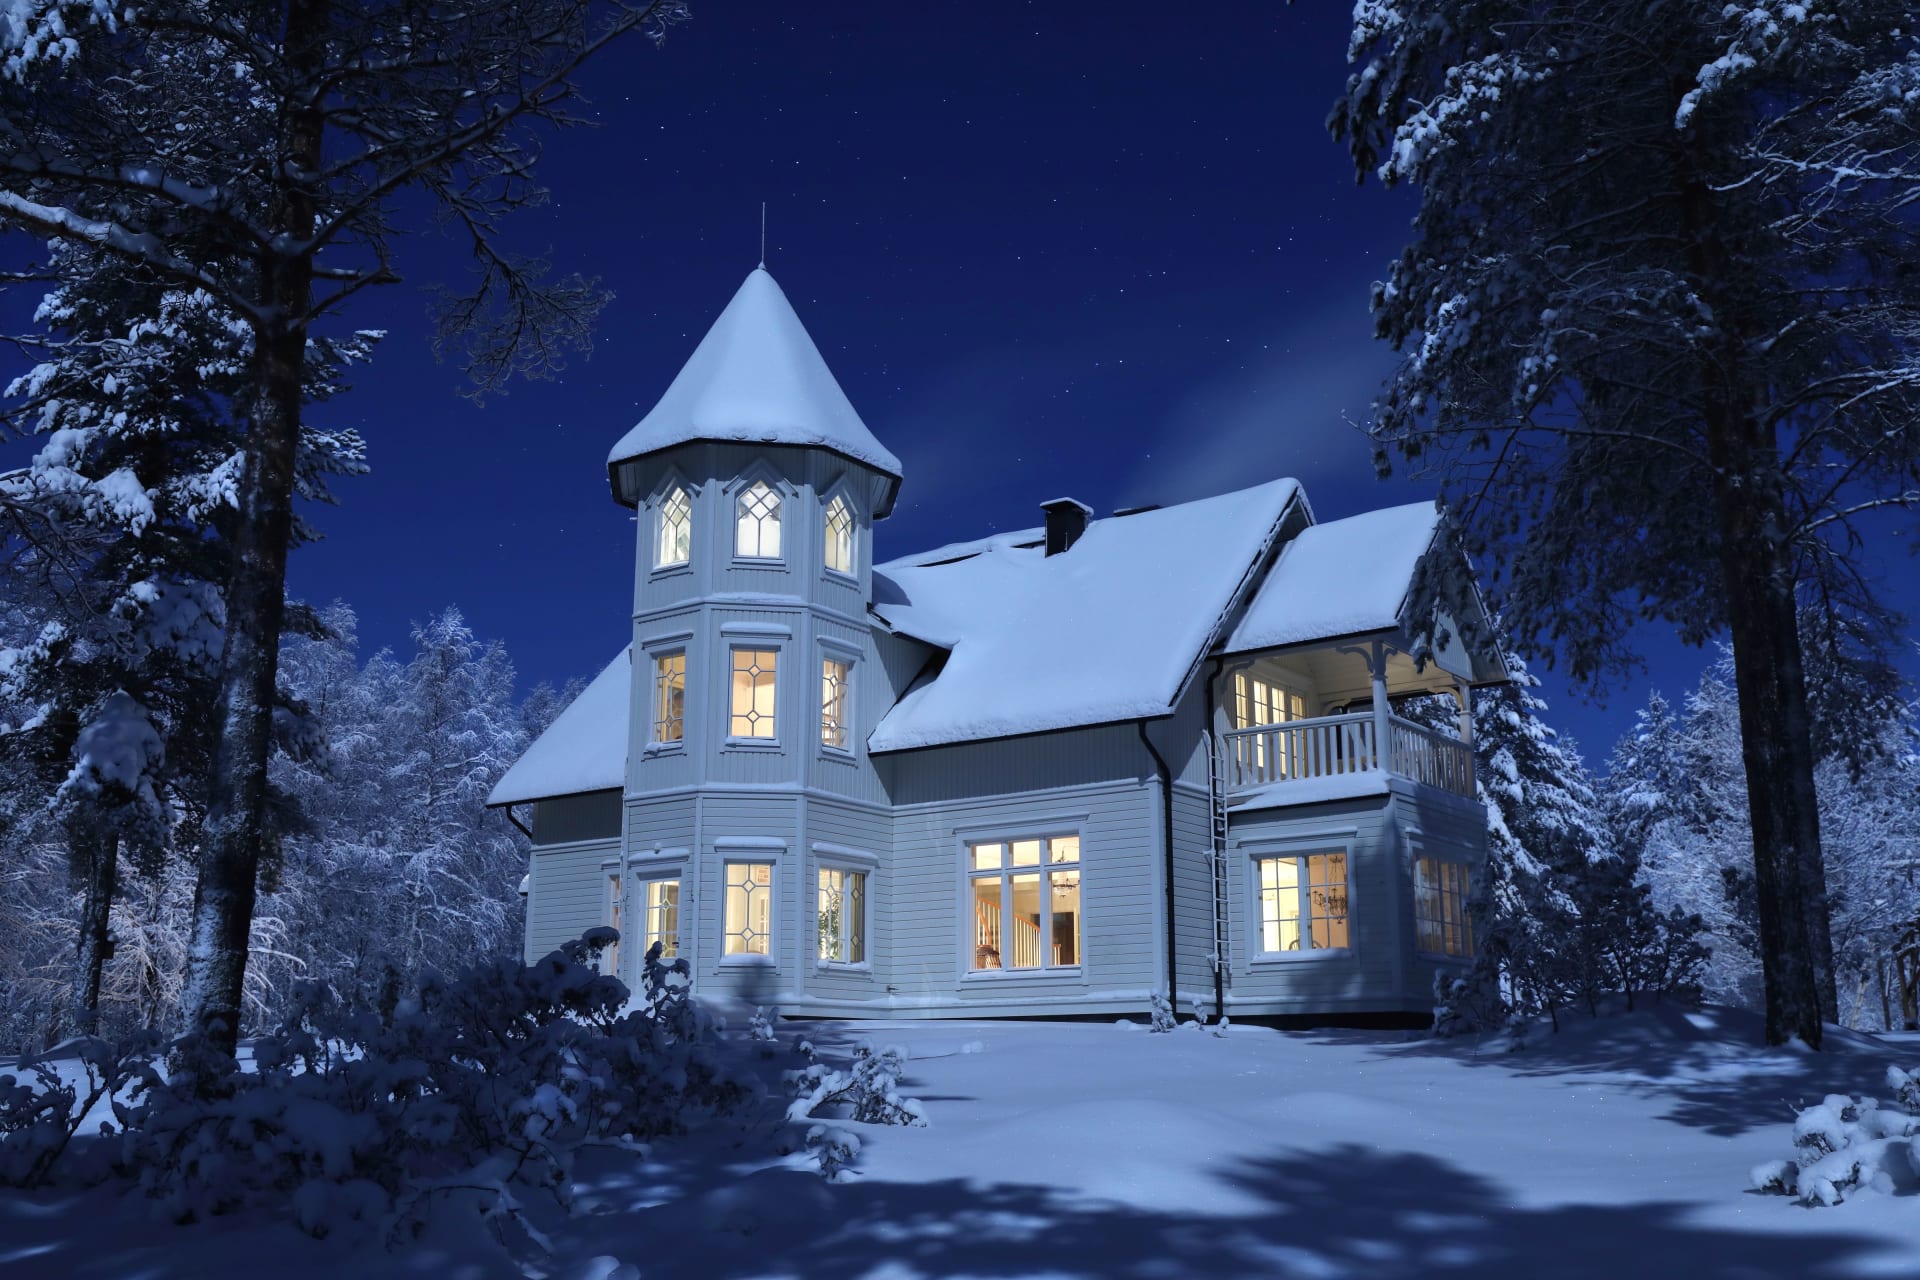 Villa Cone Beach in a snowy night during a full Moon, inviting for a luxury holiday.